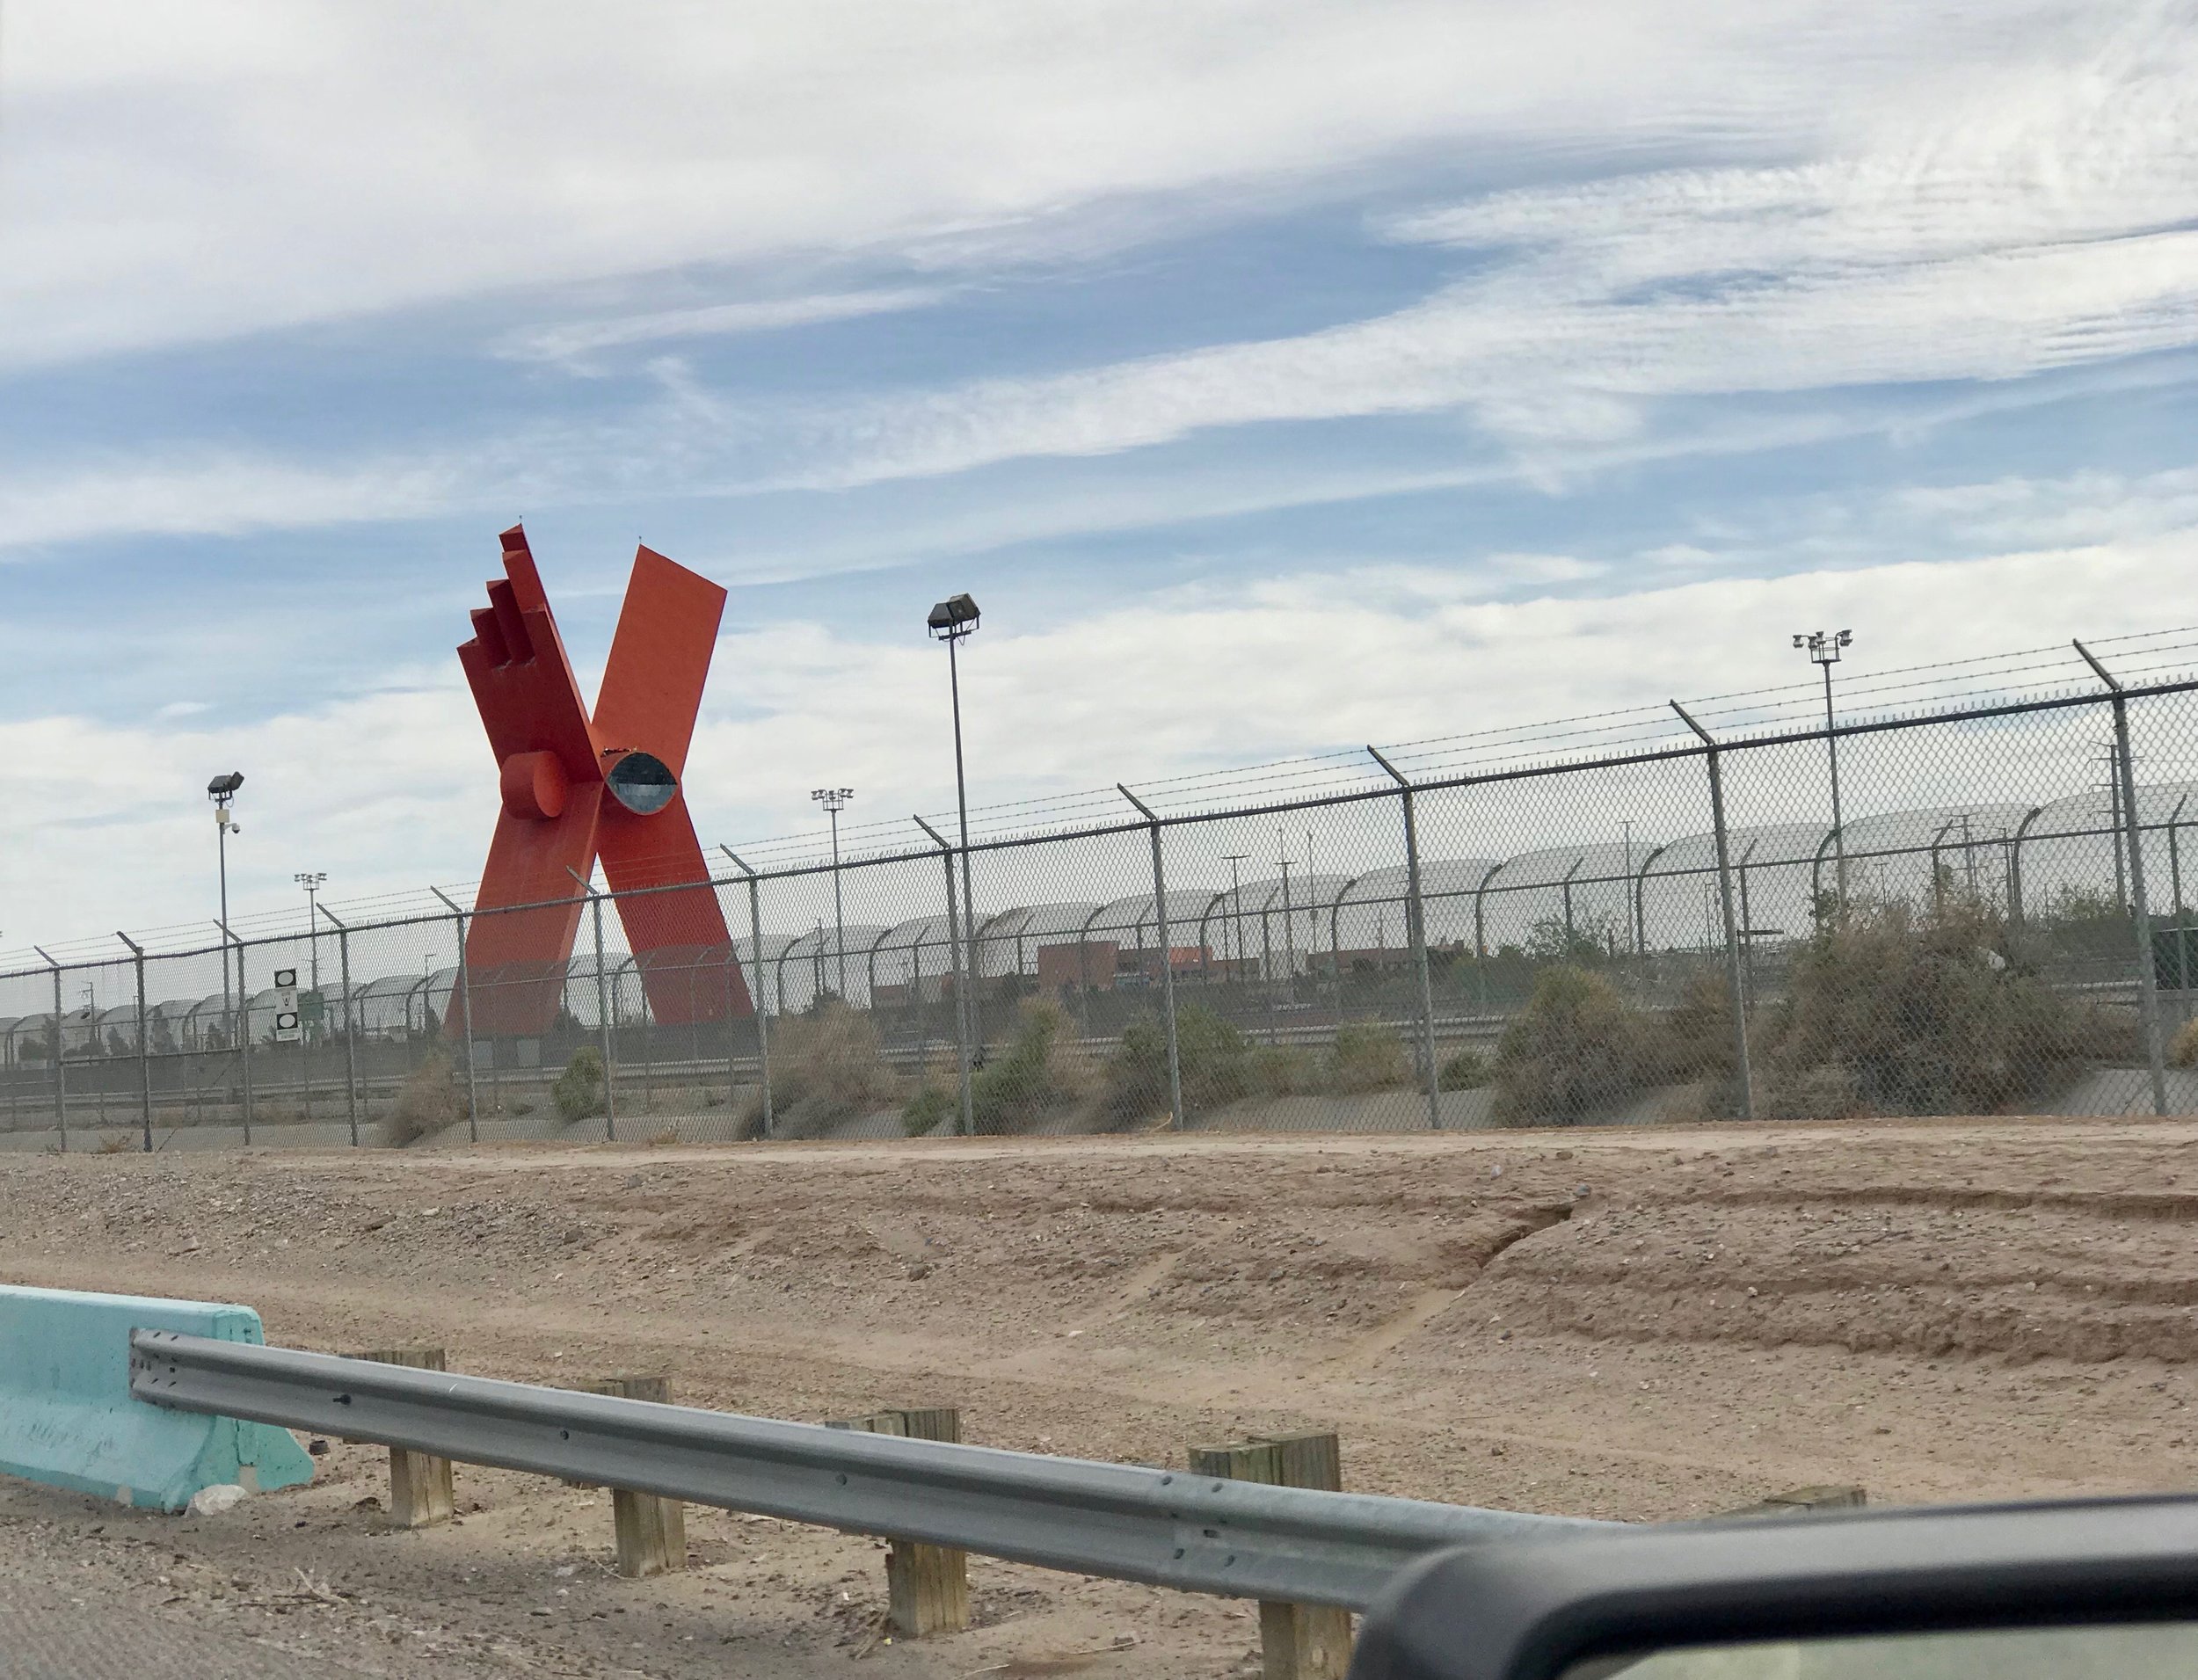  The Monumento a la Mexicaneidad, the centerpiece of an outdoor performance space in Juarez, is separated from El Paso by freeways, the Rio Grande and miles of border fencing.      